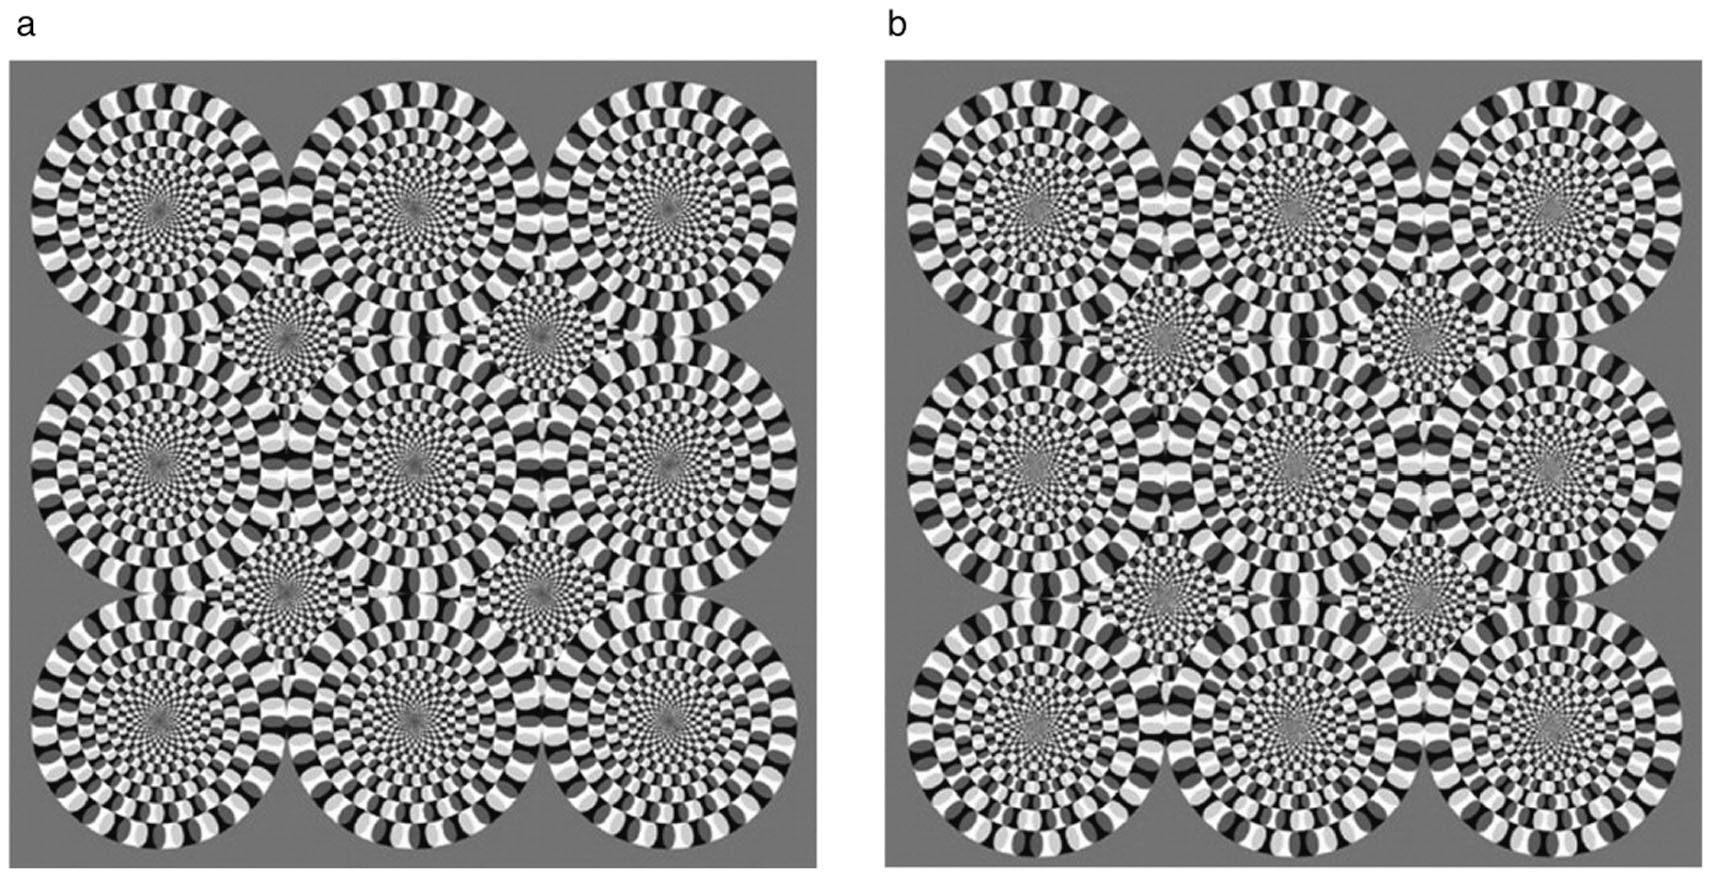 The Rotating-Tilted-Lines Illusion